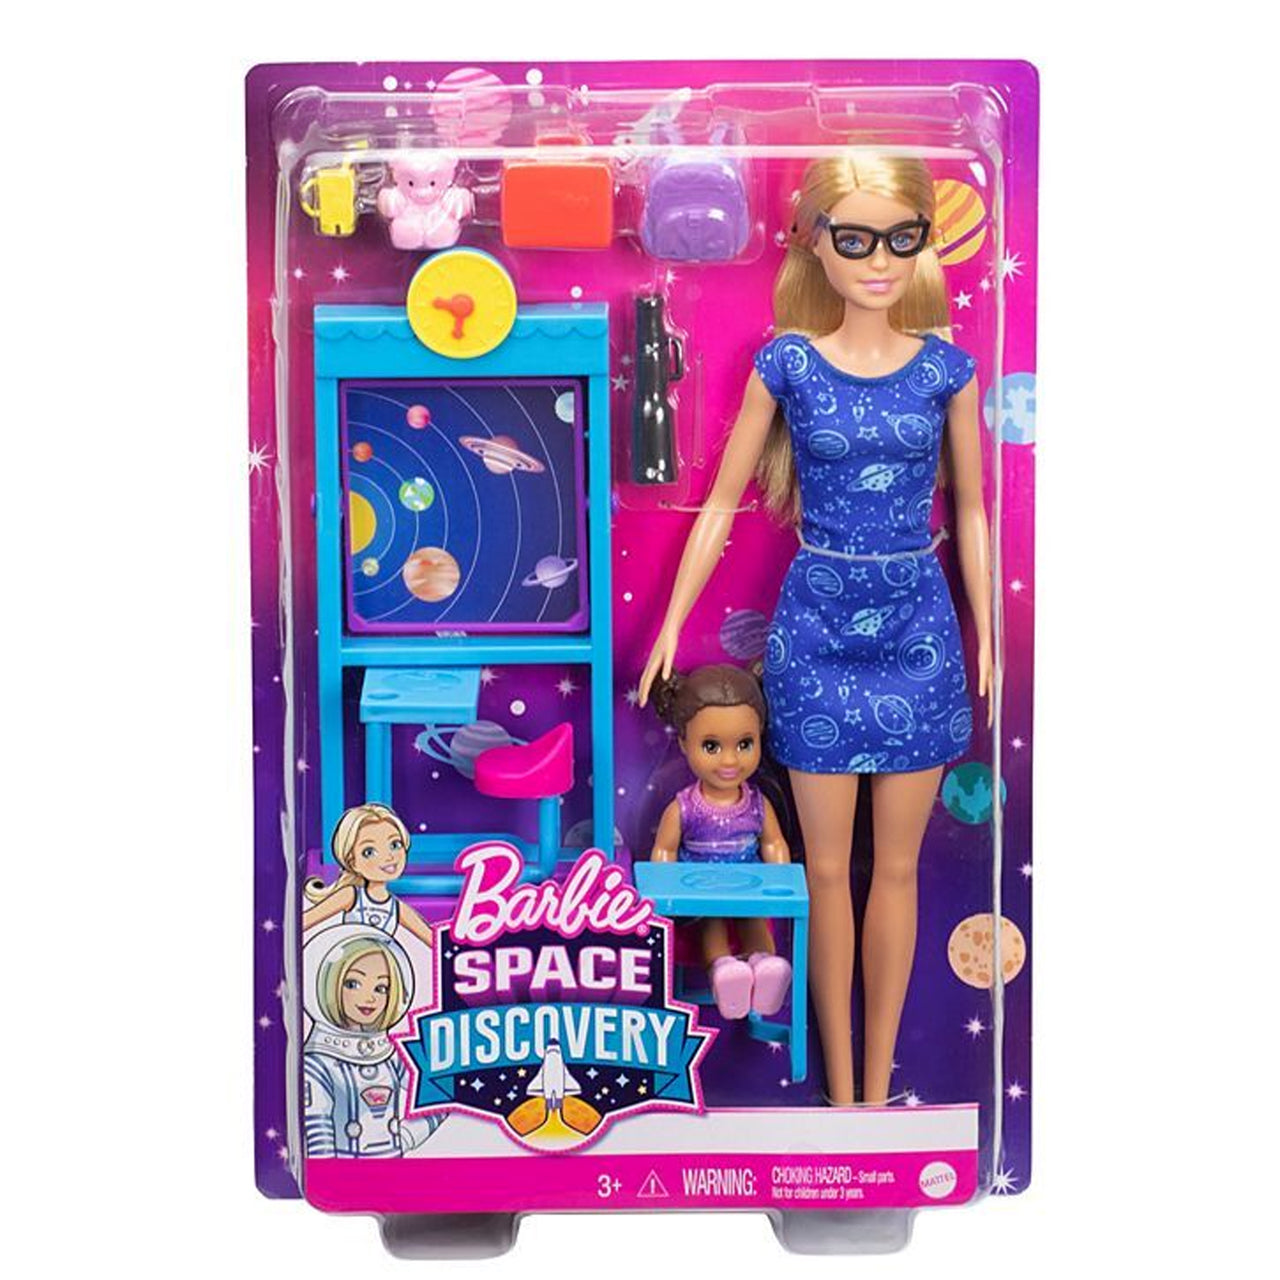 Barbie Space Discovery Science Classroom Playset with Small Student Doll